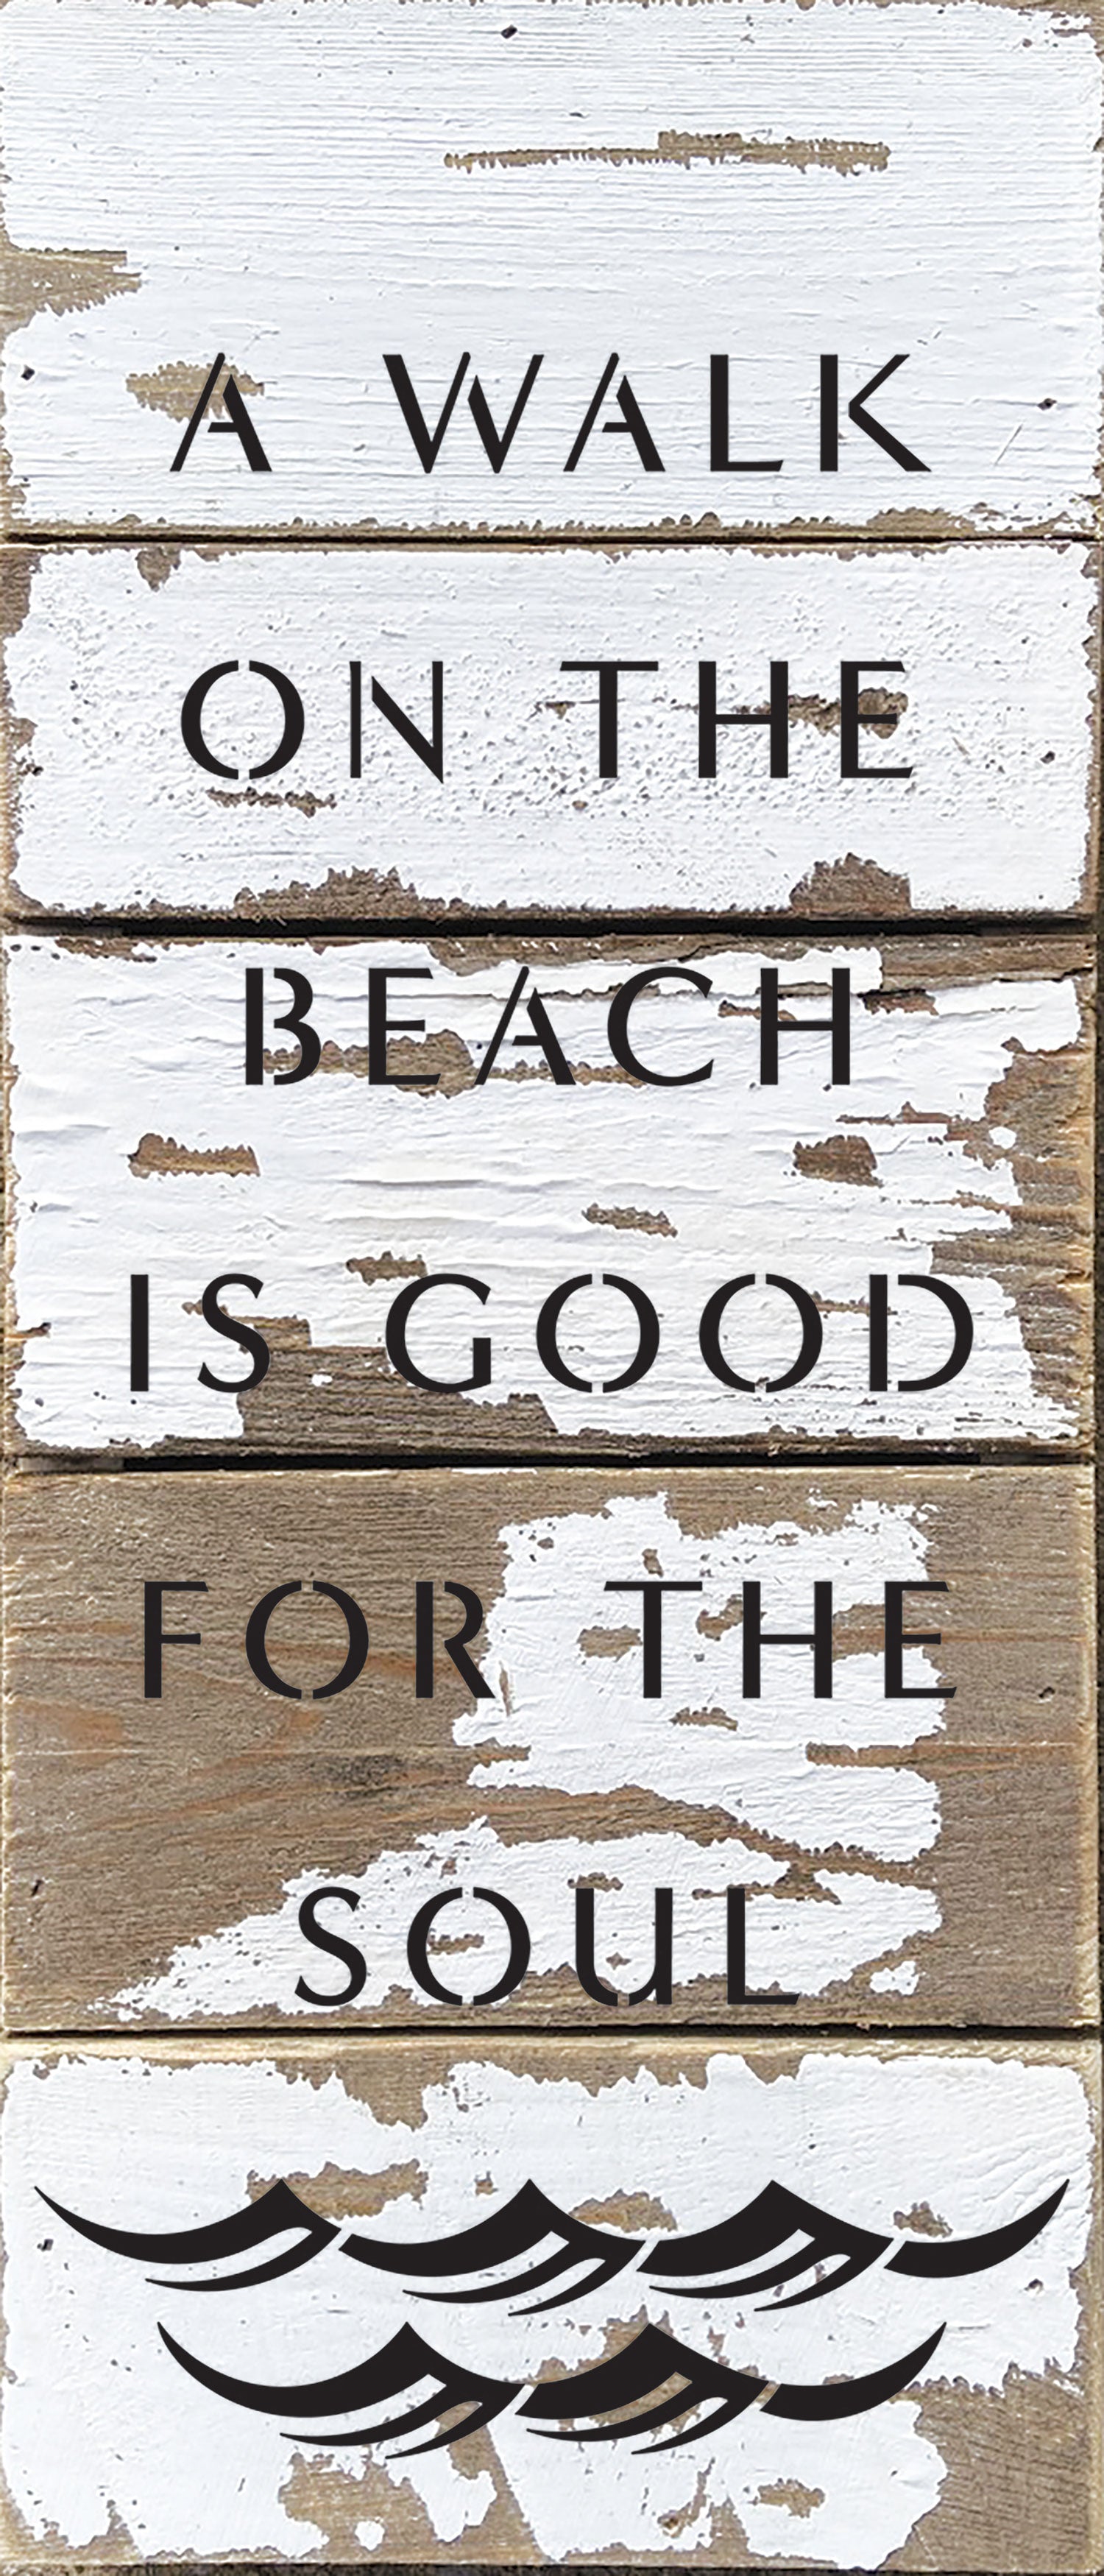 A walk on the beach is good for the soul / 6x14 Reclaimed Wood Wall Decor